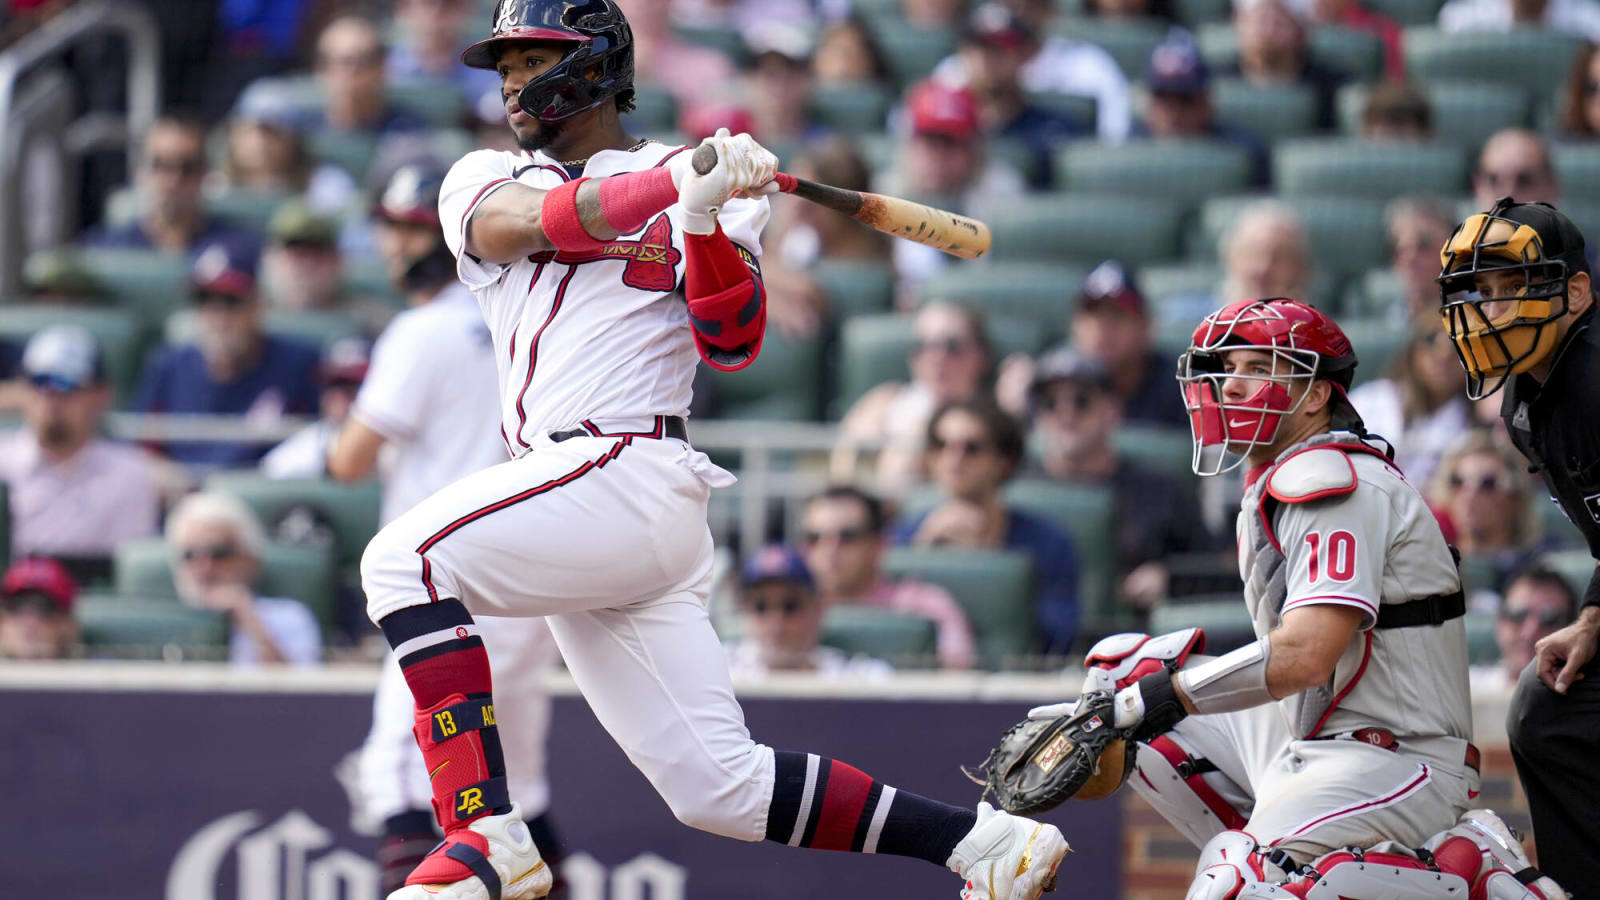 JAUDON SPORTS: Predicting the 2023 Braves Opening Day Roster